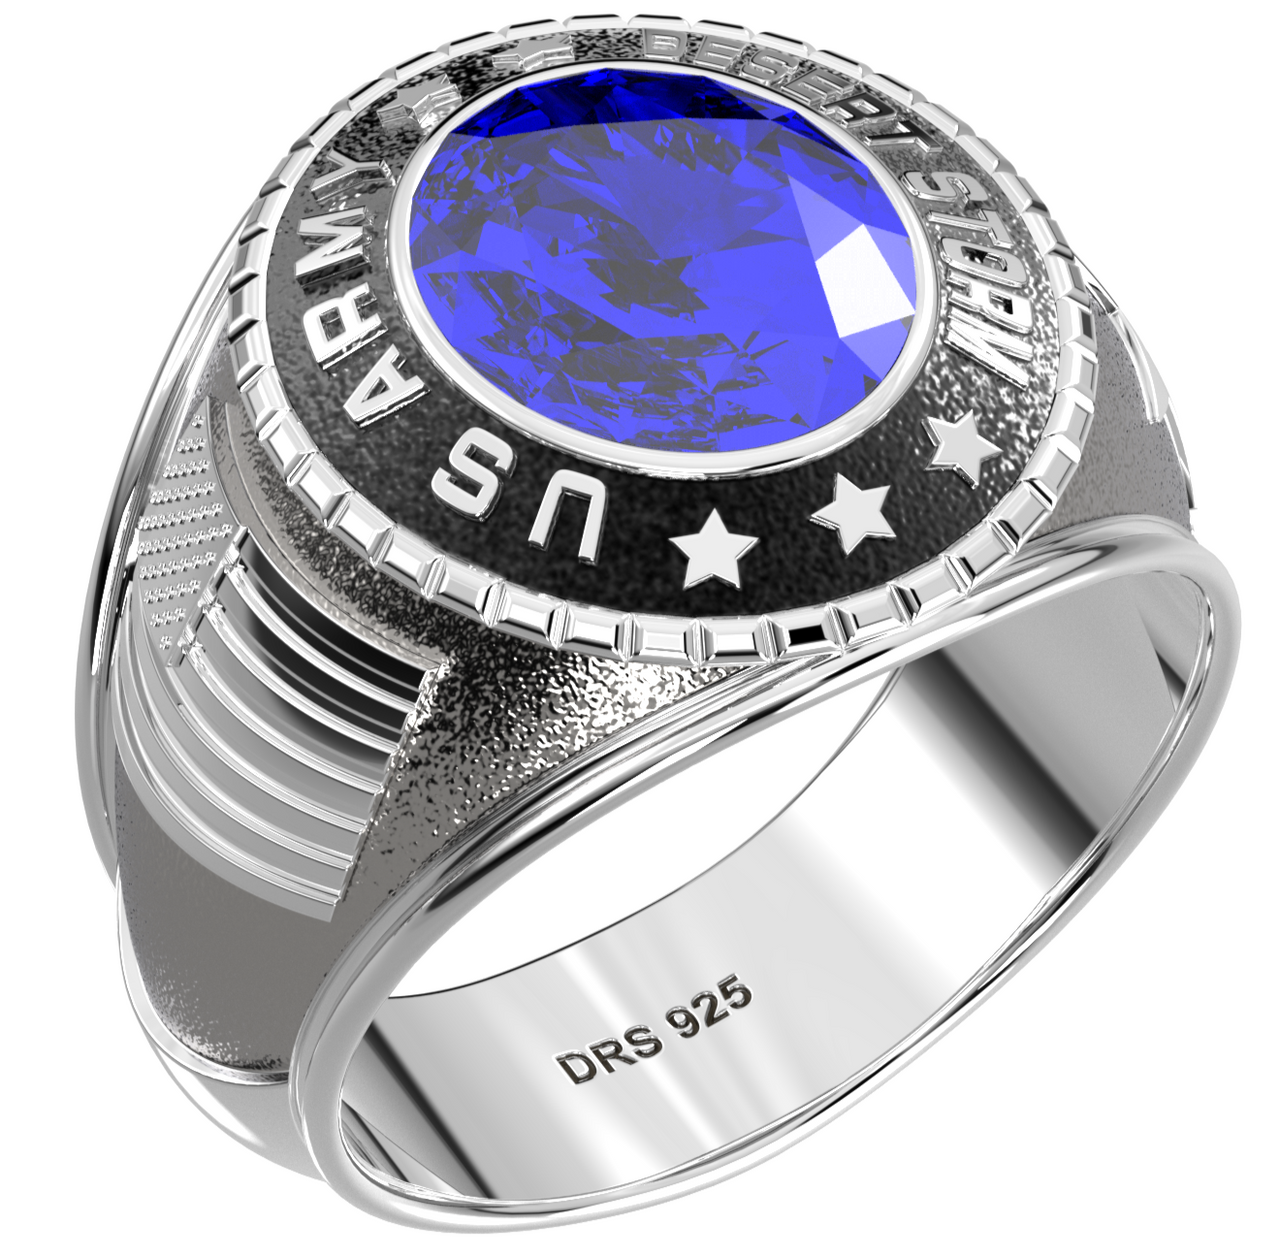 Customizable Desert Storm Men's 925 Sterling Silver US Army Military Solid Back Ring